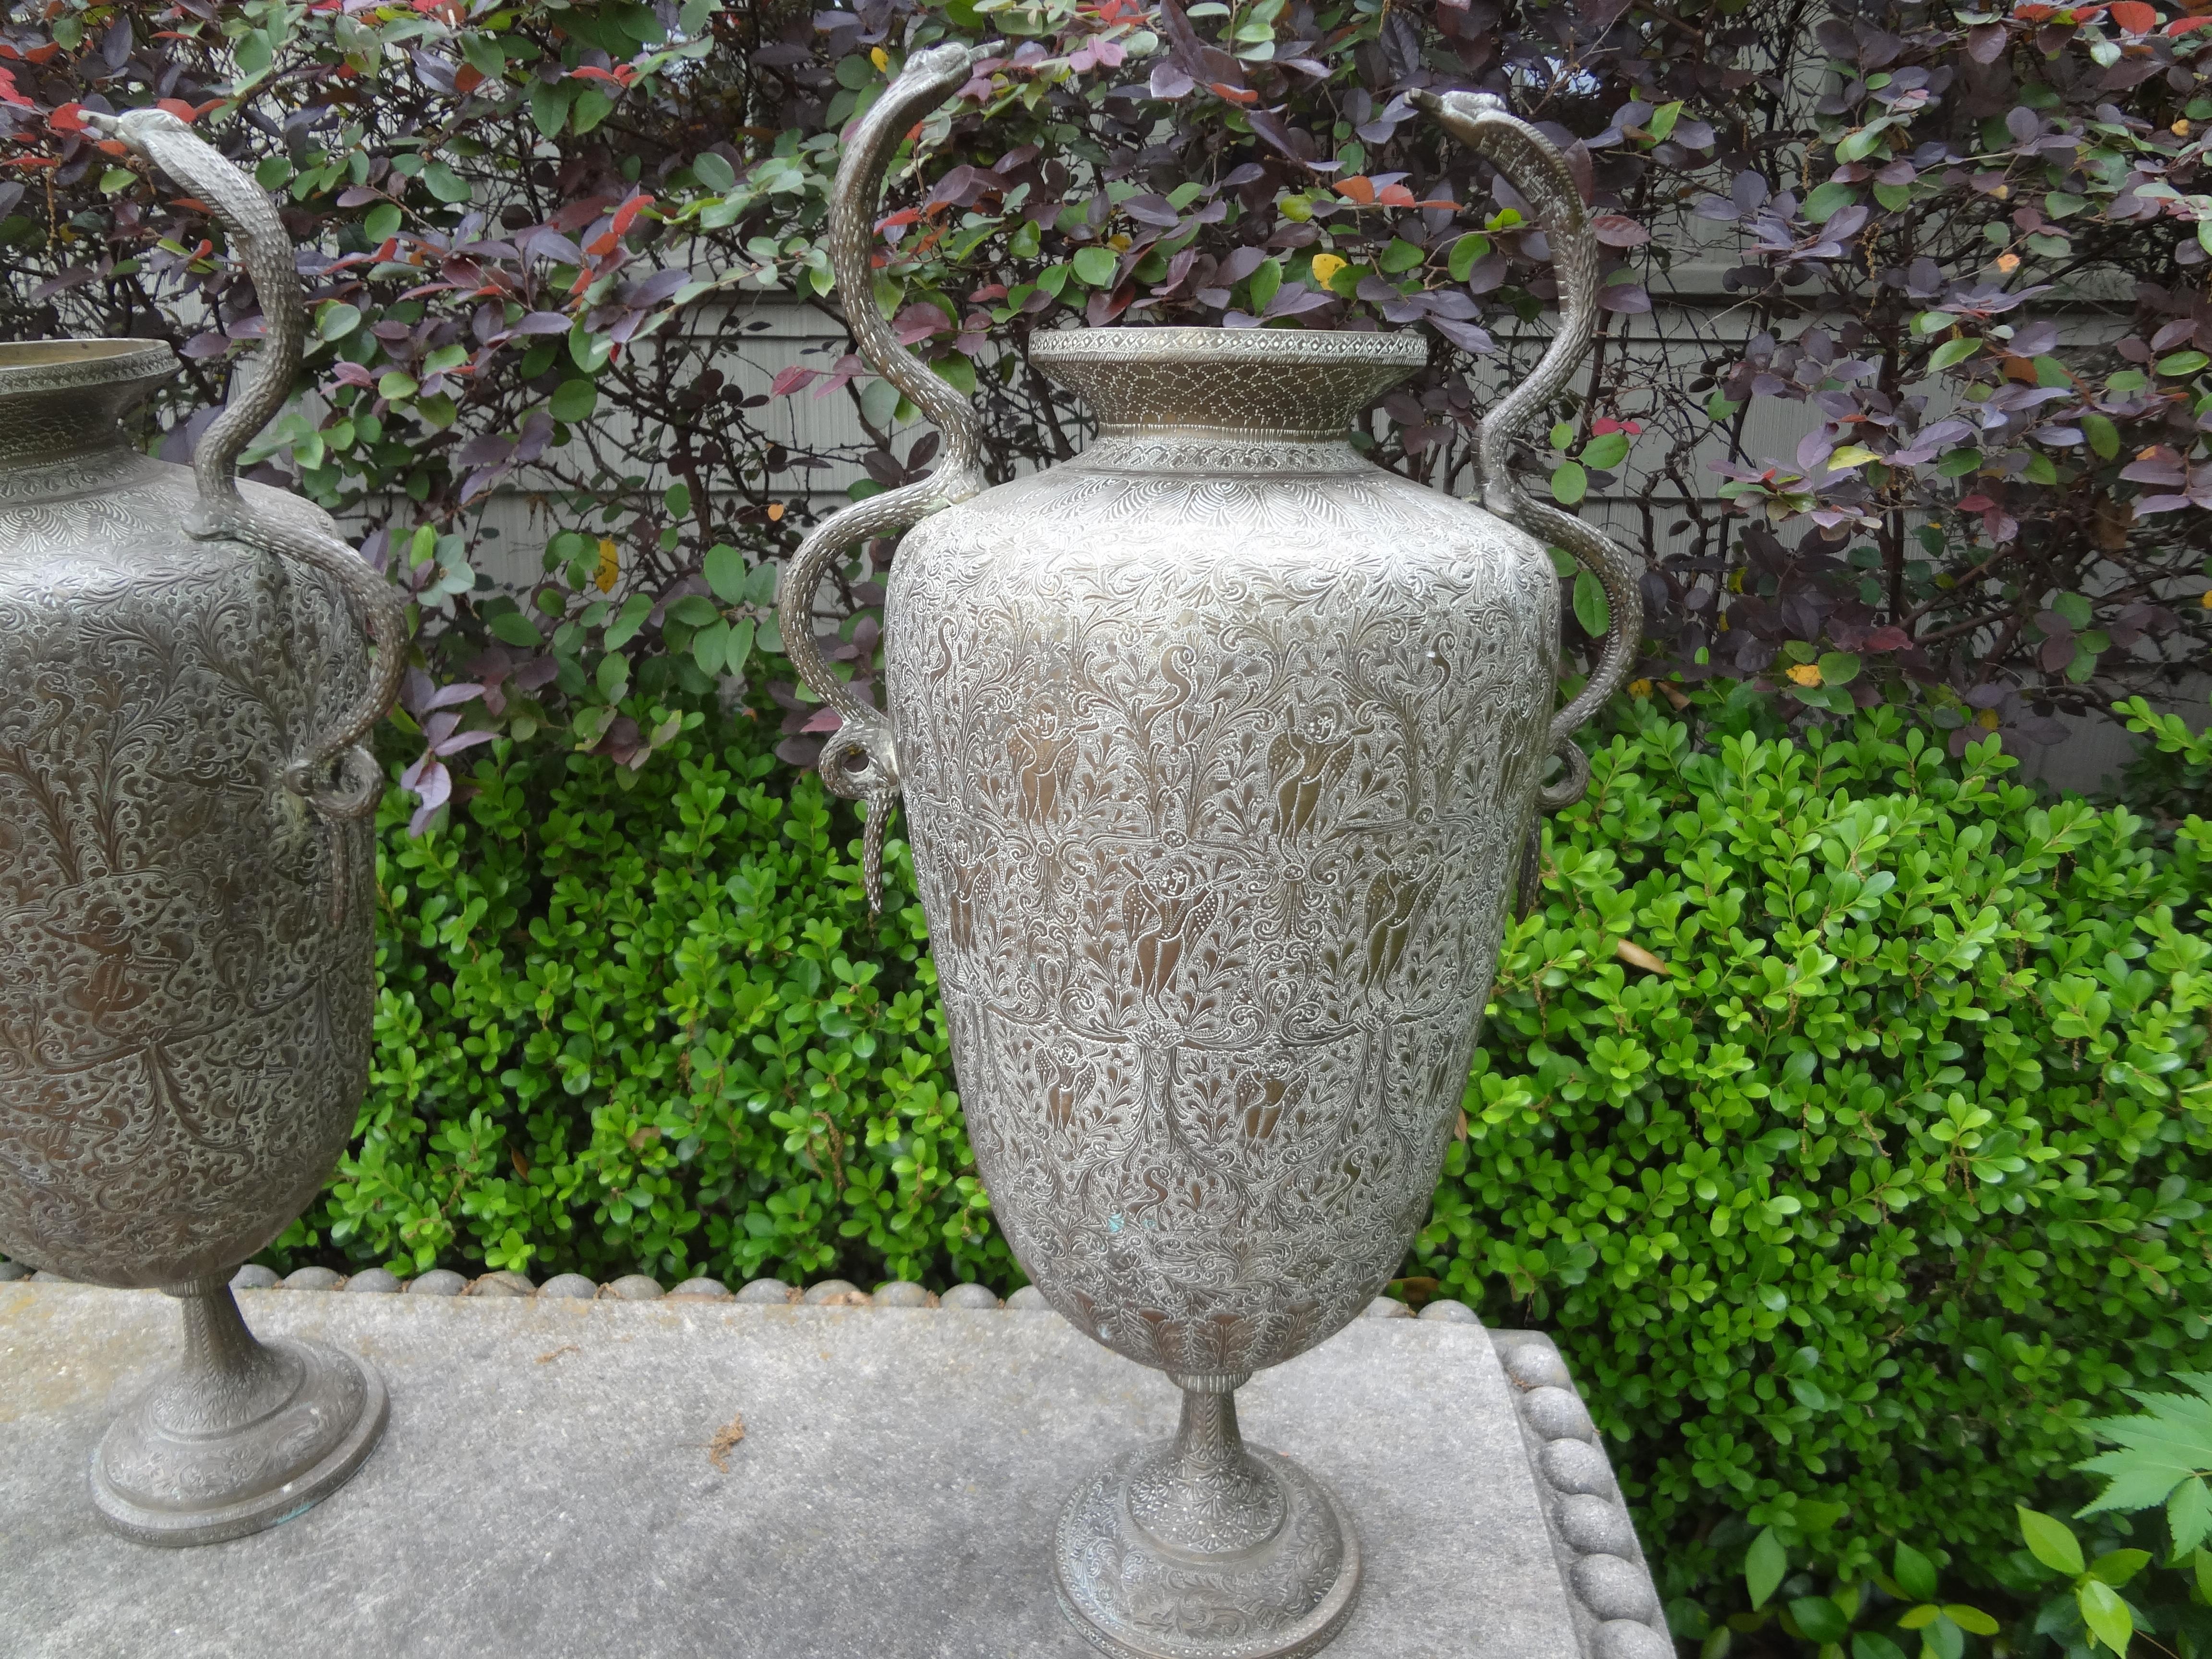 Pair Of Anglo-Indian Brass Urns With Cobras.
This great pair of incised brass urns with cobra handles date to the 1920's India.
Unusual statement accessory.